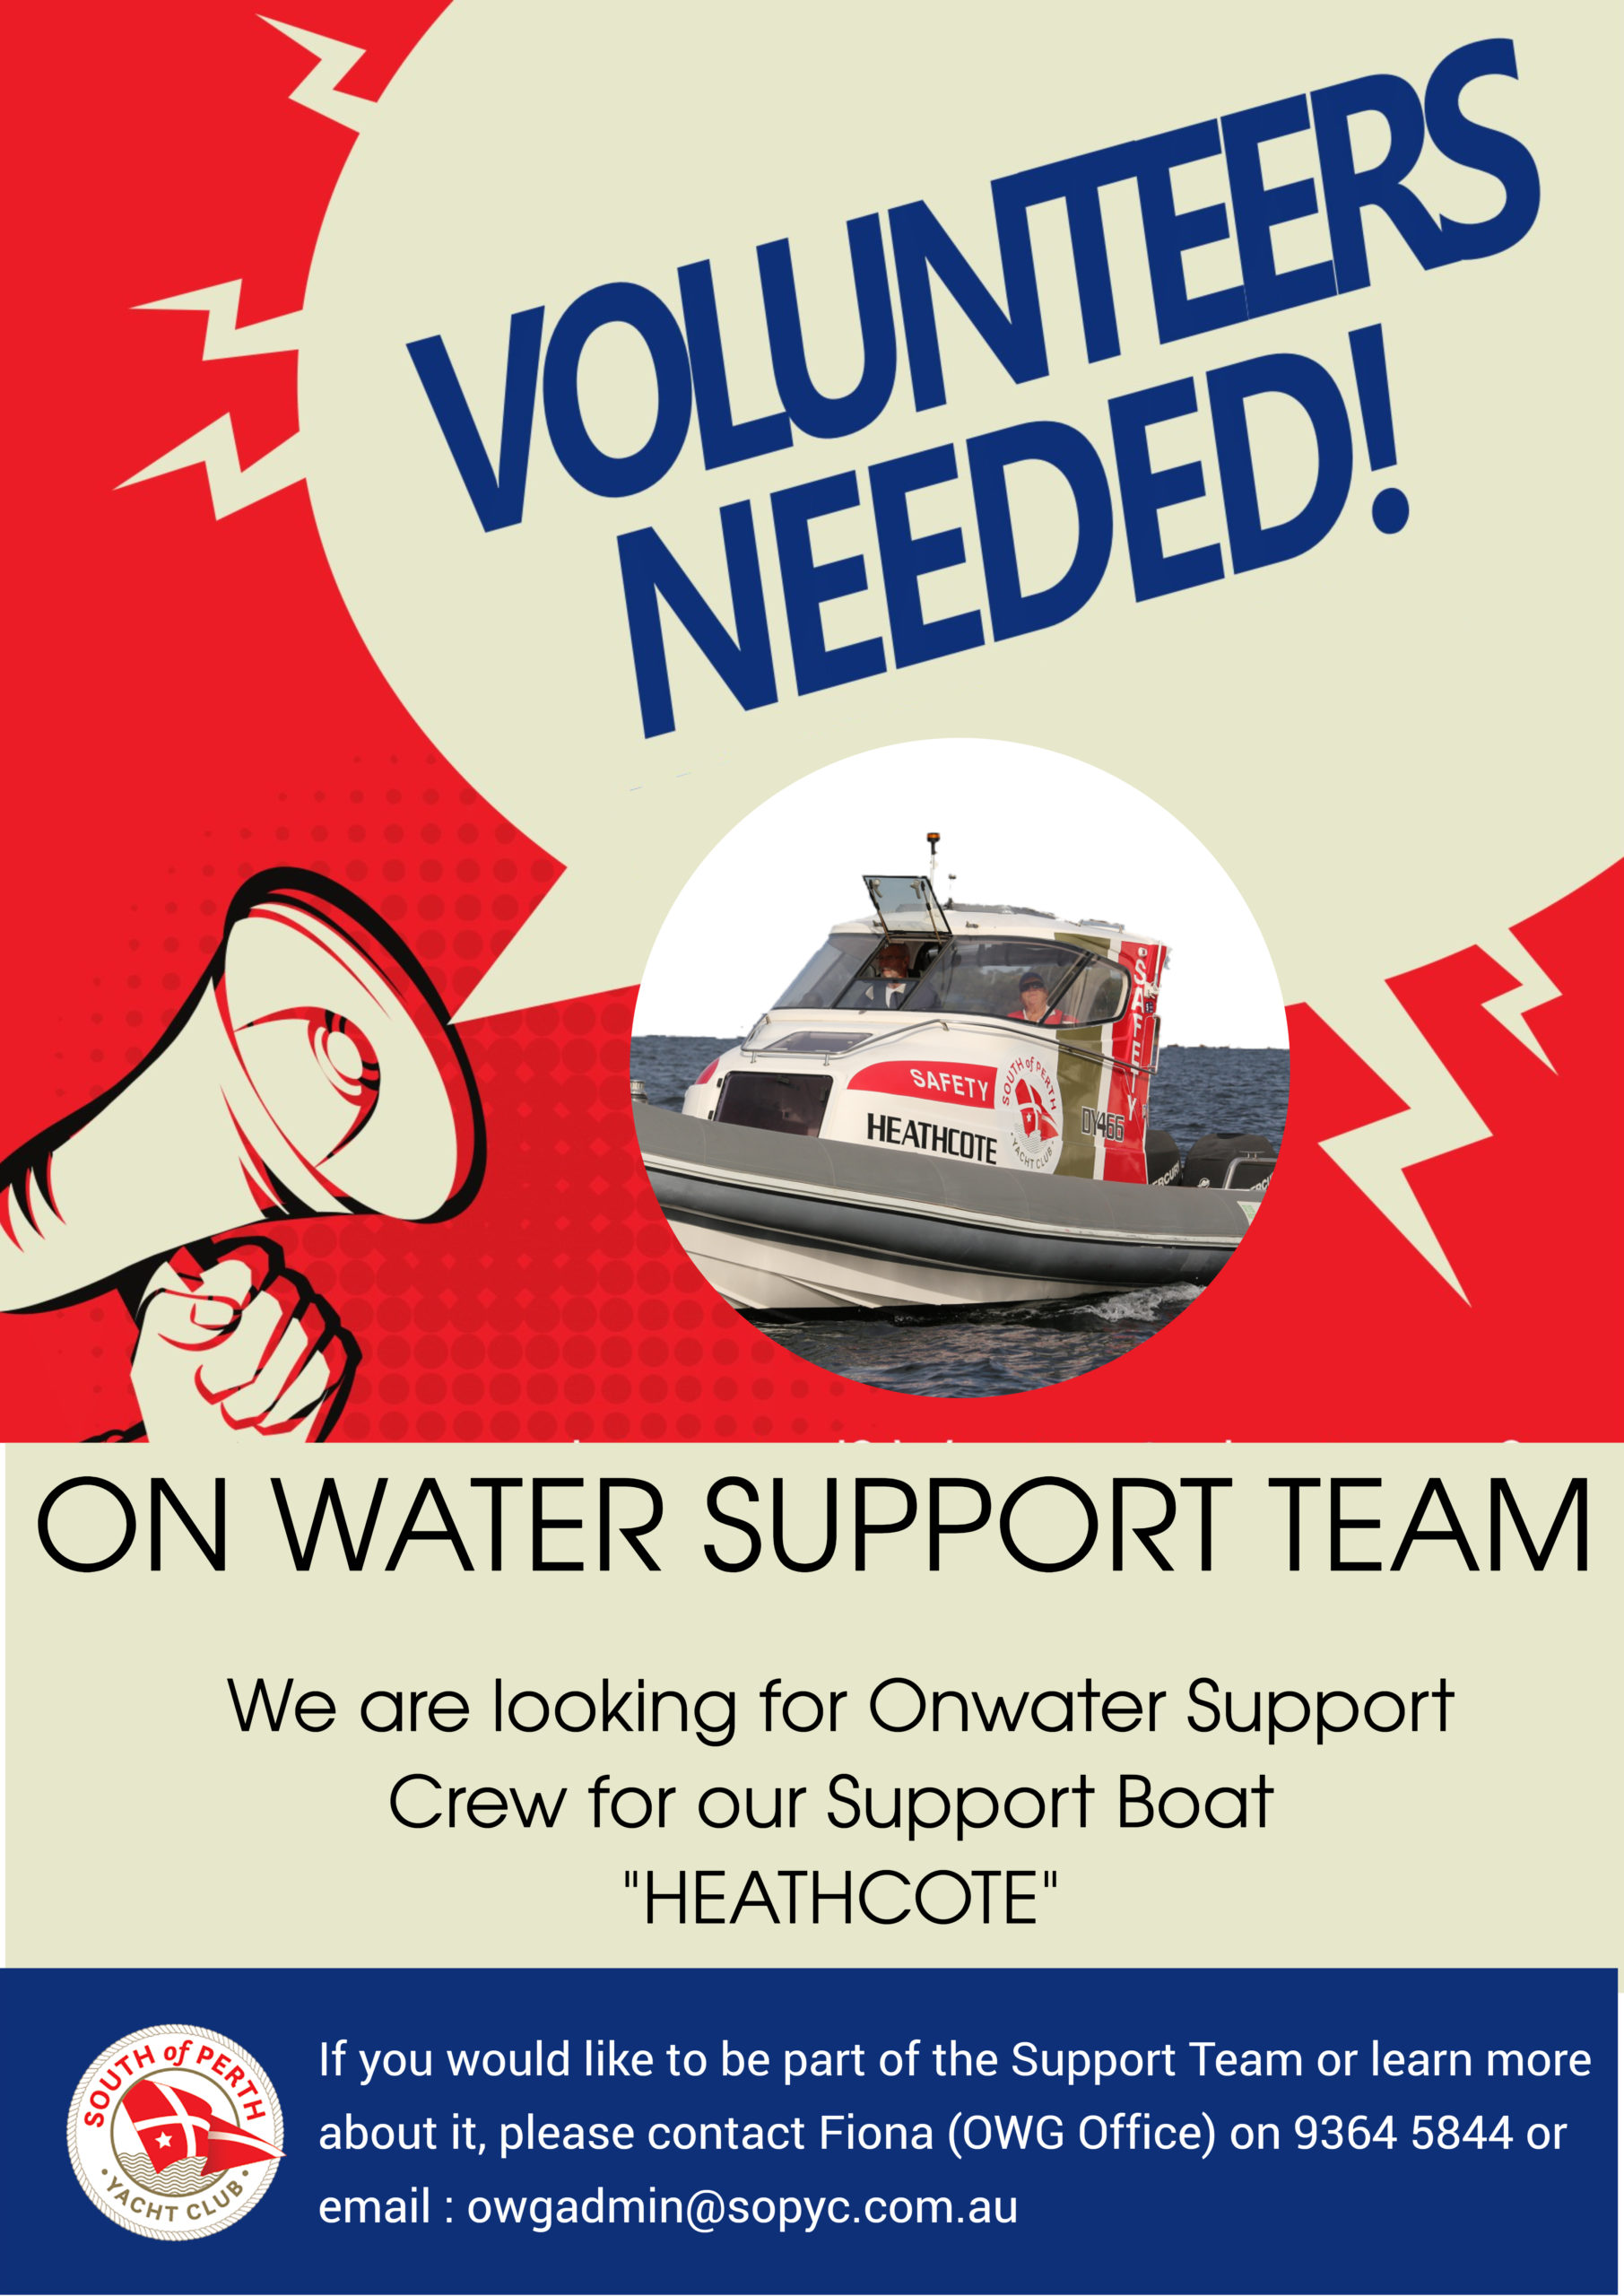 Volunteers Wanted. We are looking for Onwater support crew for our Support Boat Heathcote